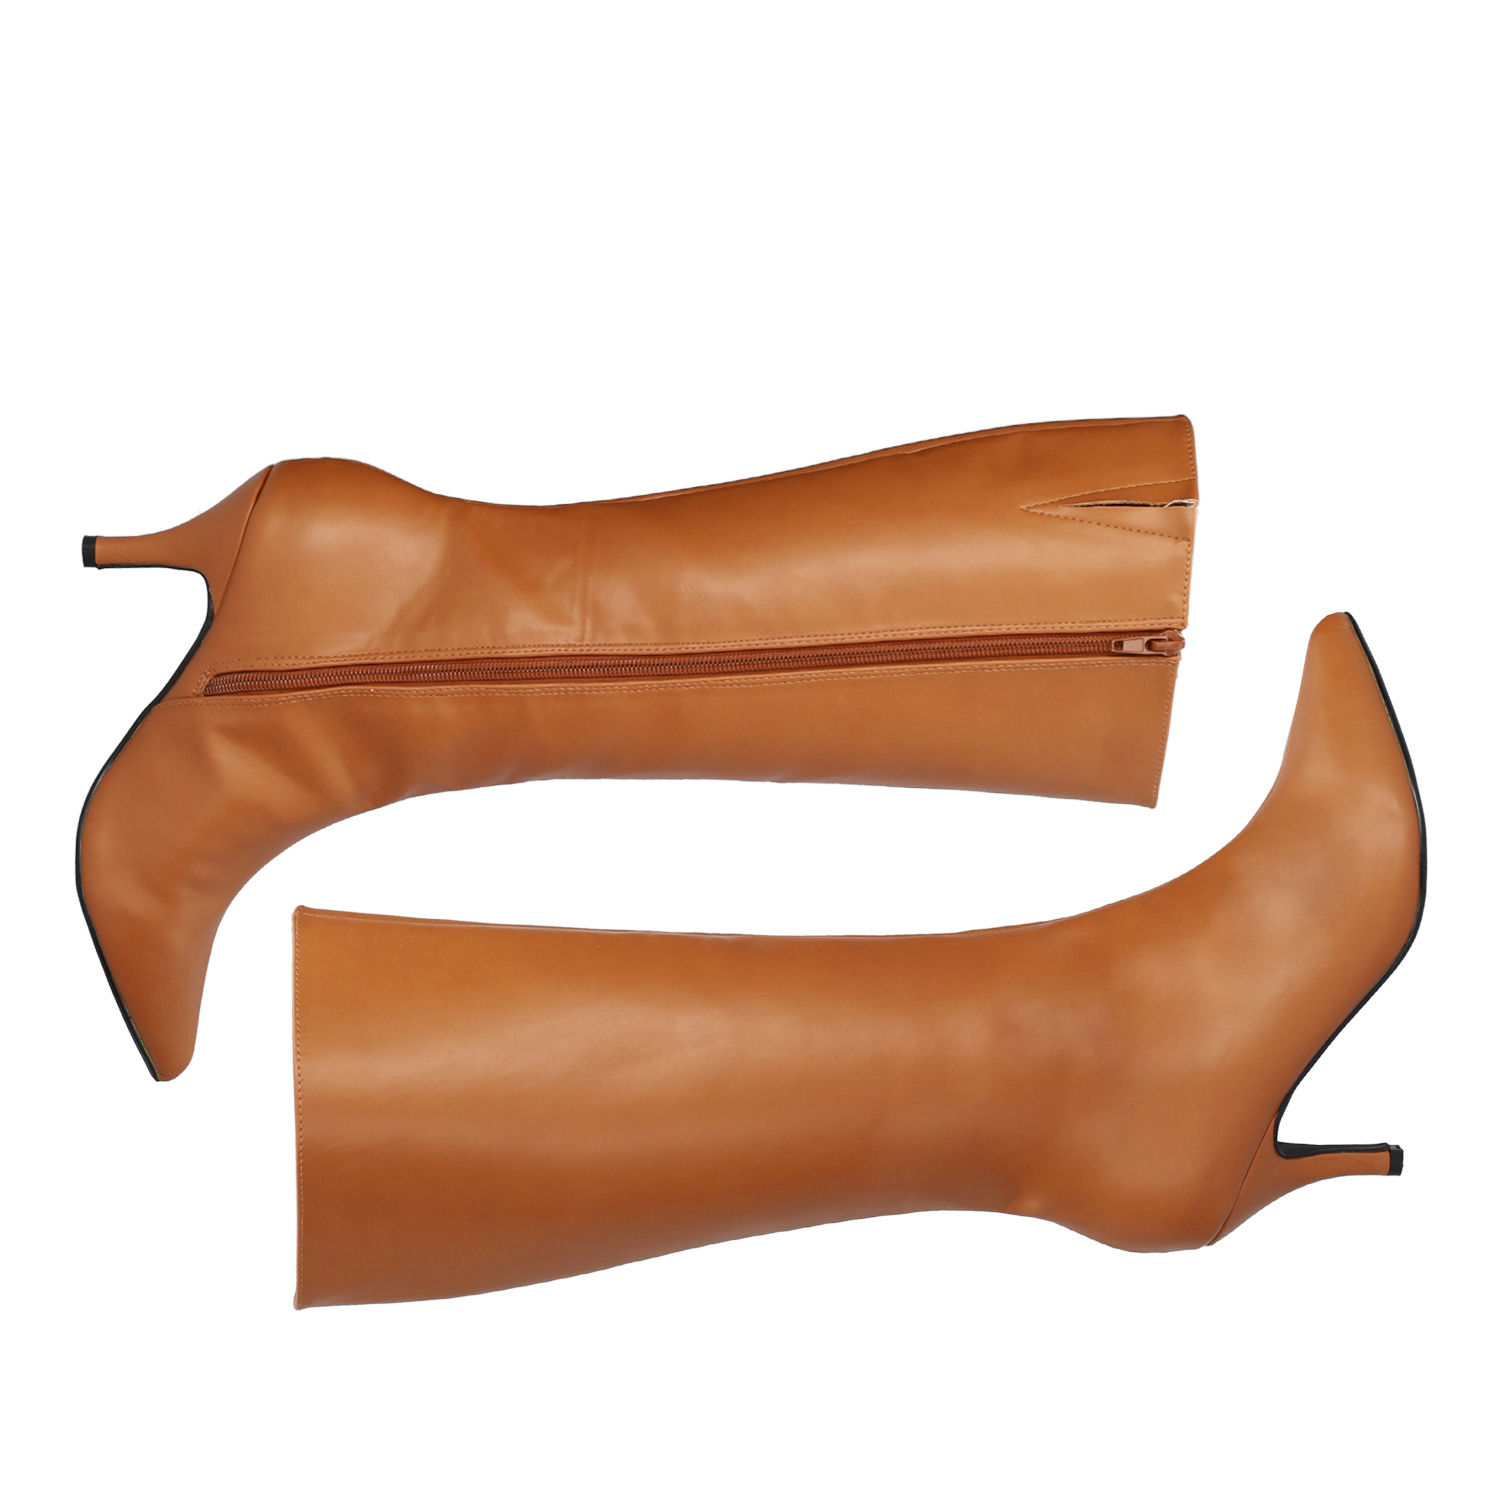 Smooth camel colored faux leather boots 